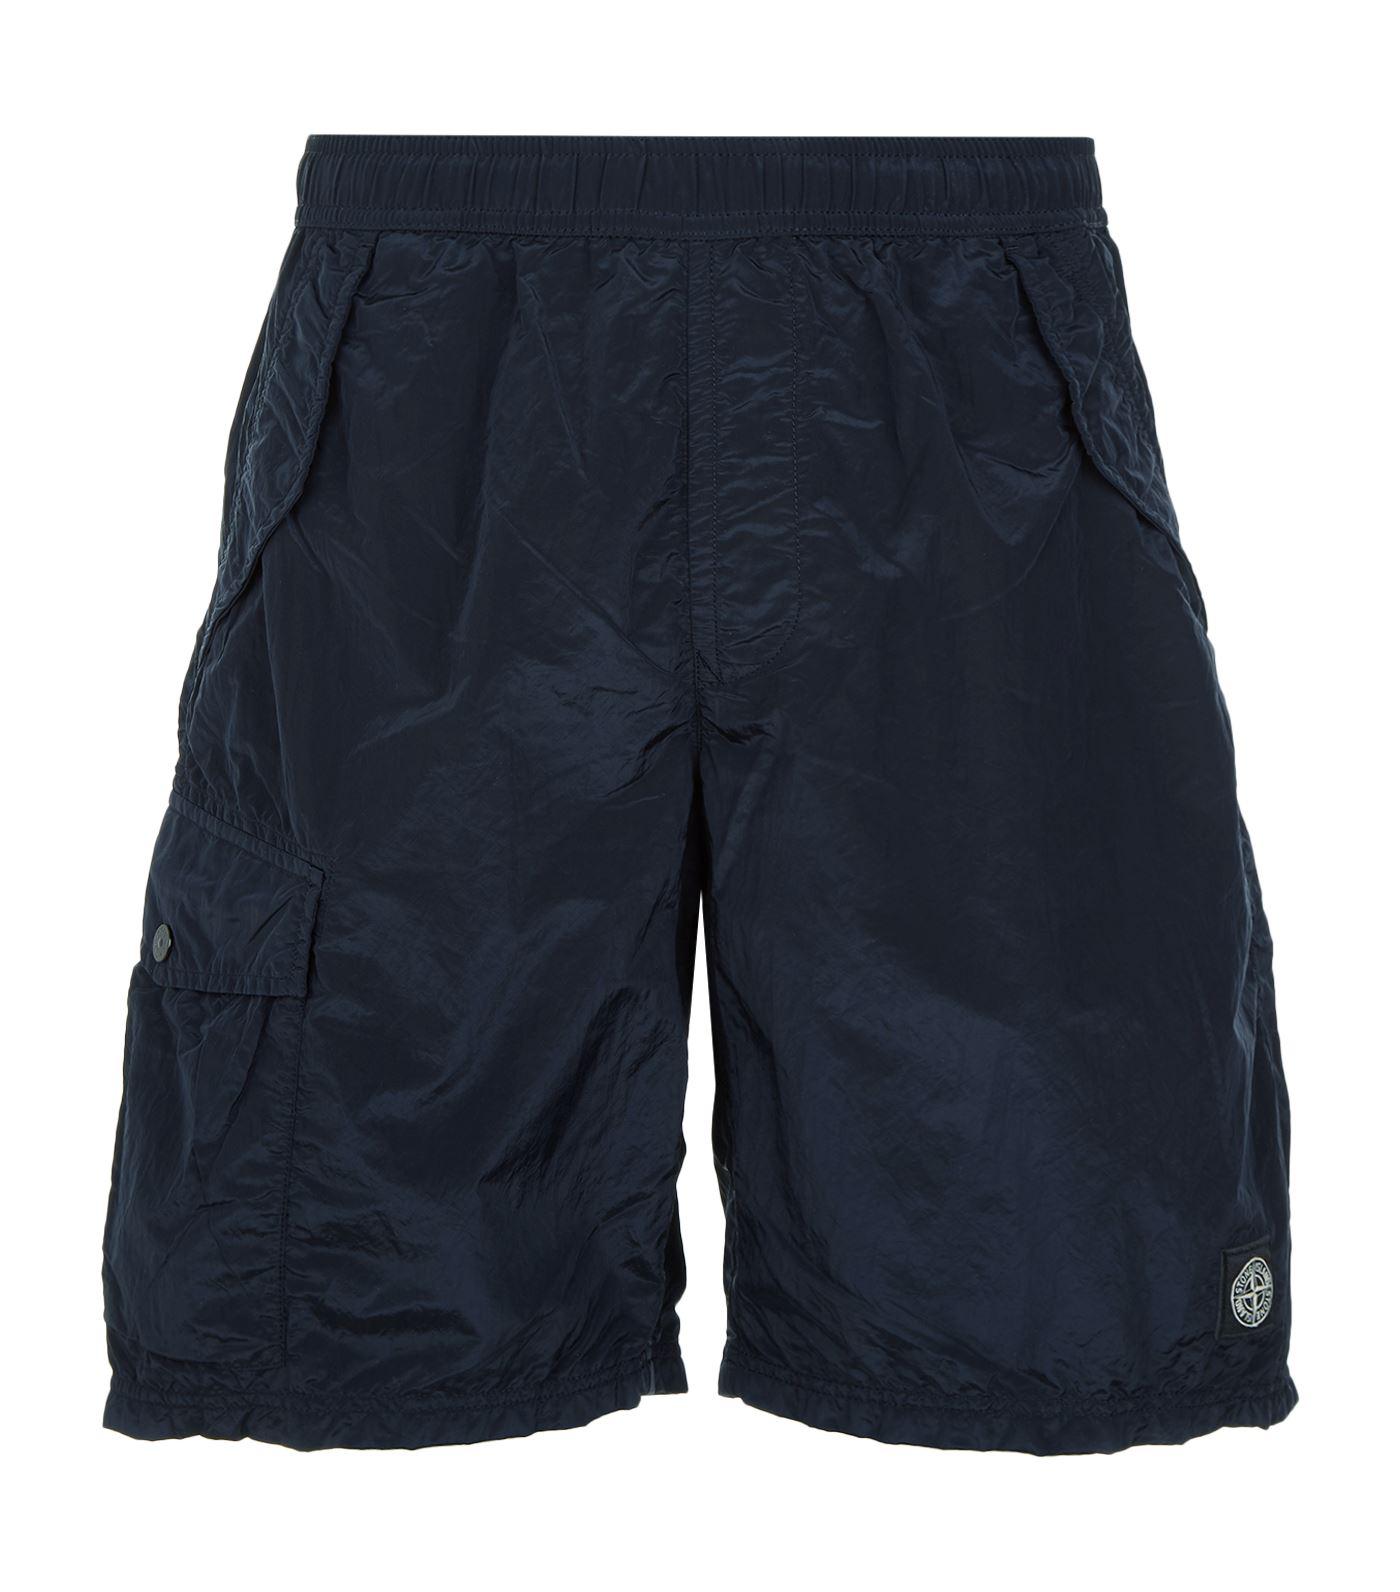 Stone Island Synthetic Nylon Metal Shorts in Navy (Blue) for Men - Lyst